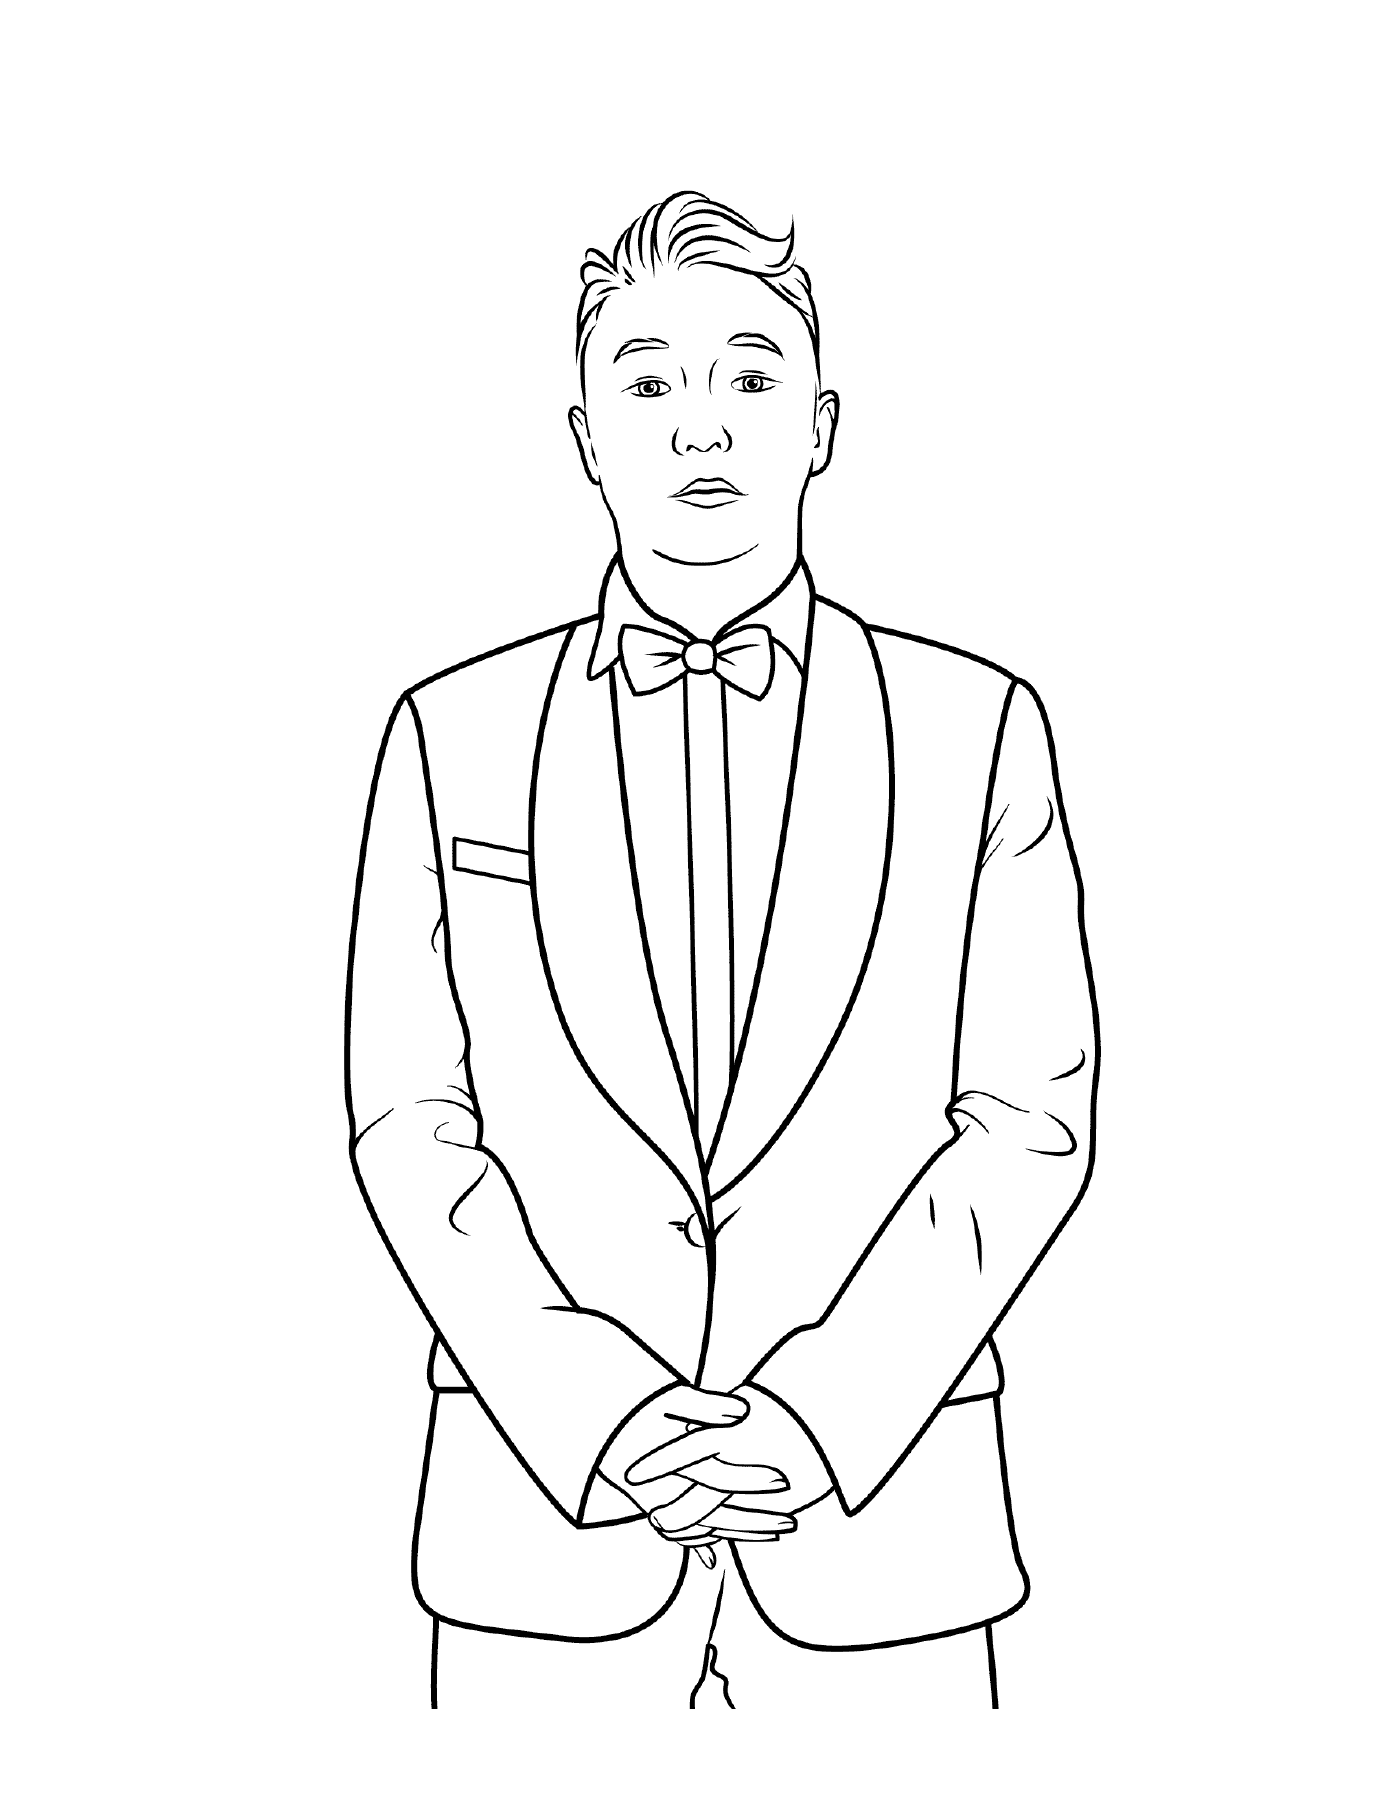  A man in a suit in a line 